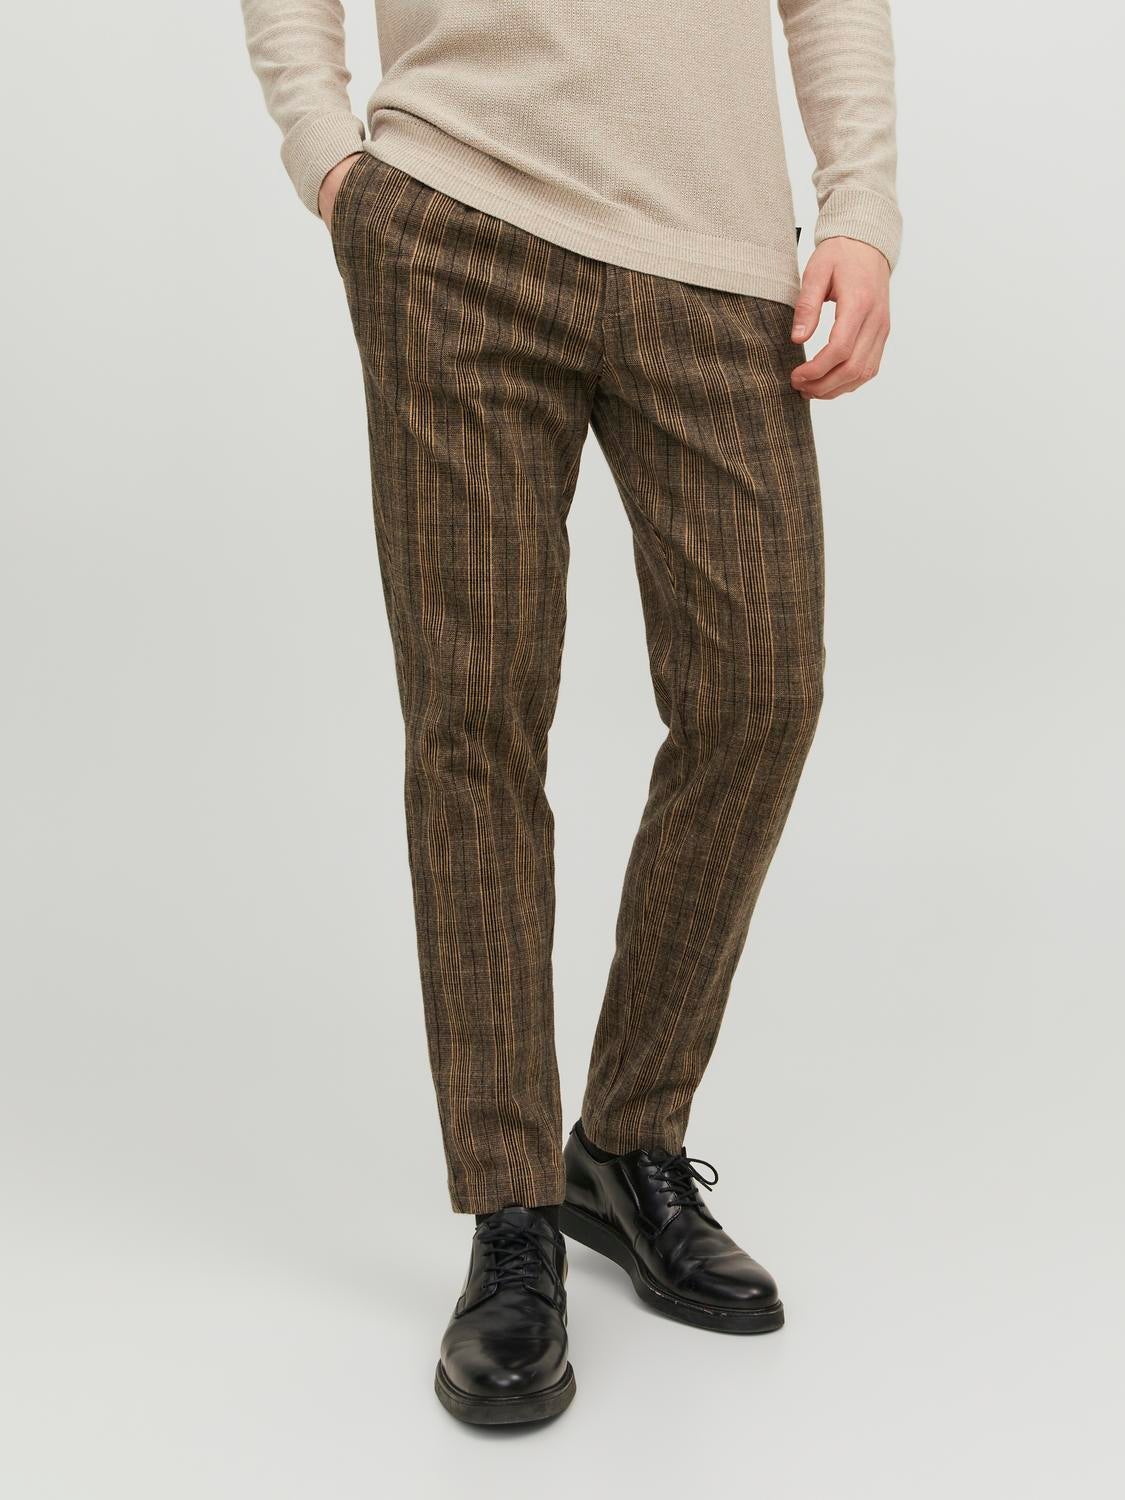 Buy WES Formals Solid Dark Khaki Carrot Fit Trousers from Westside